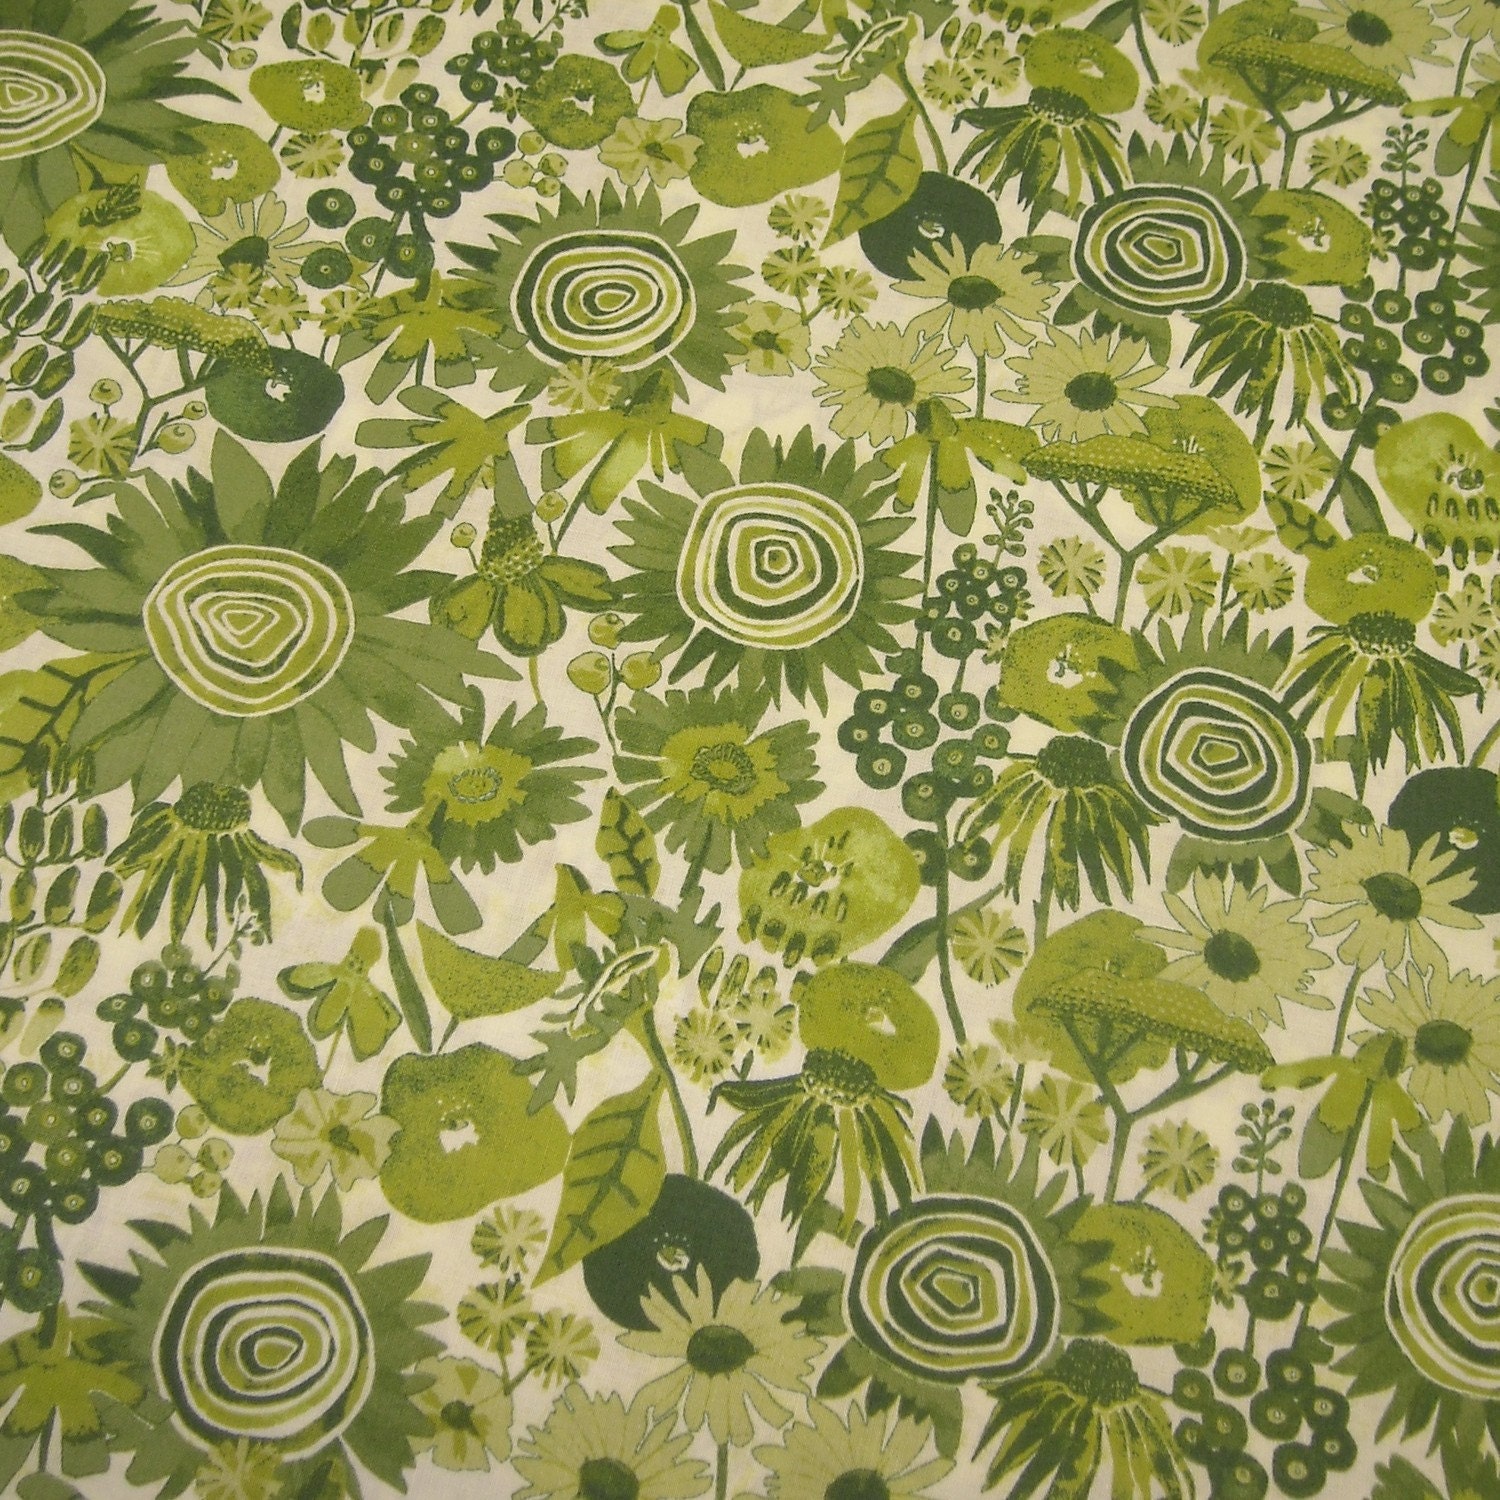 Cotton Fabric: Floral Cotton In the Beginning My Sunshine Green Tonal Flowers - 1 YD - FabricFascination